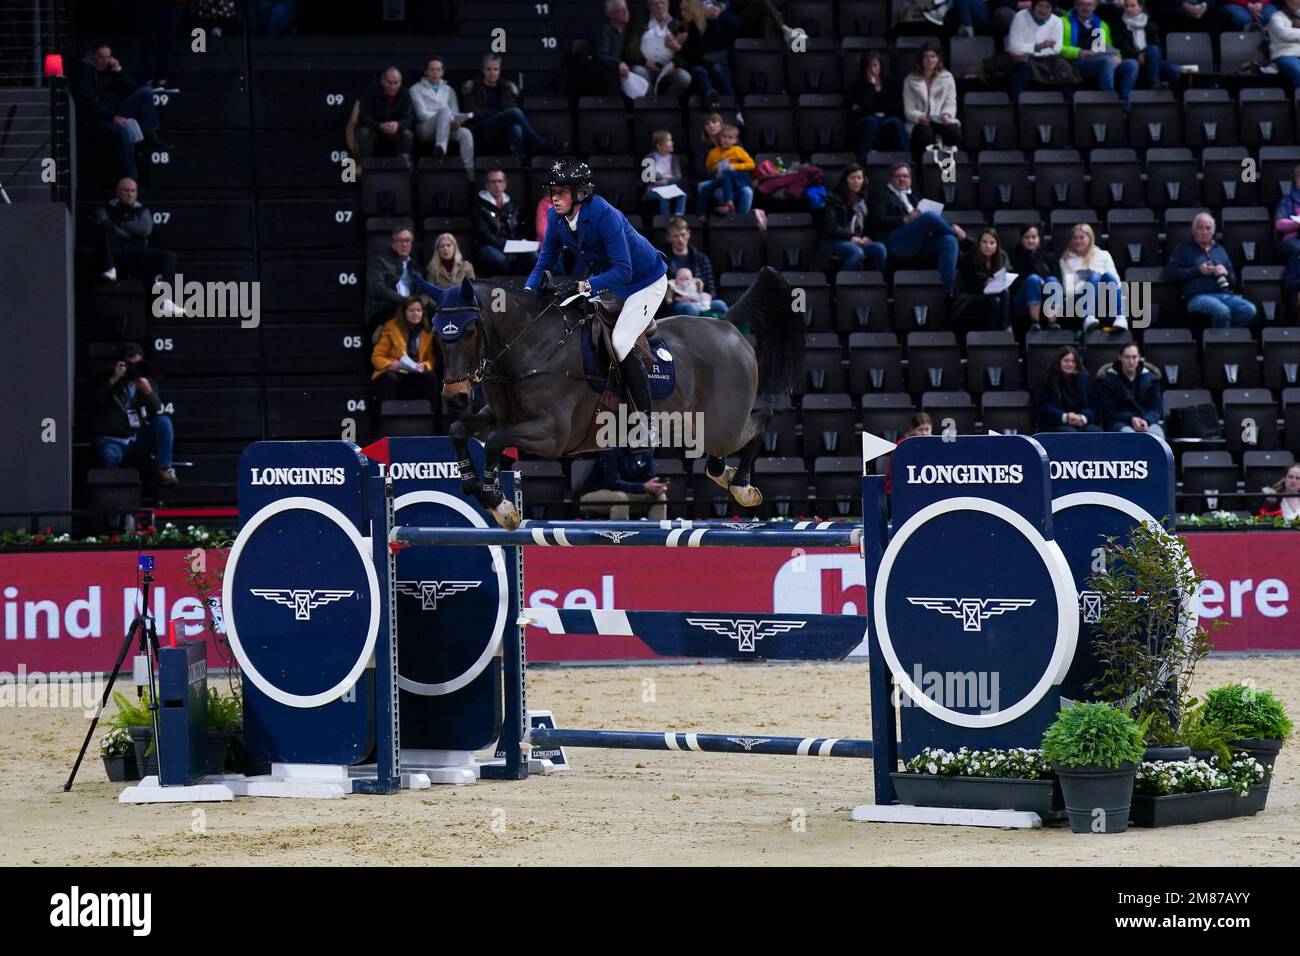 12.01.2023, Basel, St. Jakobshalle, Riding: Longines CHI Classics Basel, Martin Fuchs (Switzerland) with horse Commissar Pezi jumps during the international jumping competition against the clock (Daniela Porcelli / SPP-JP) Stock Photo